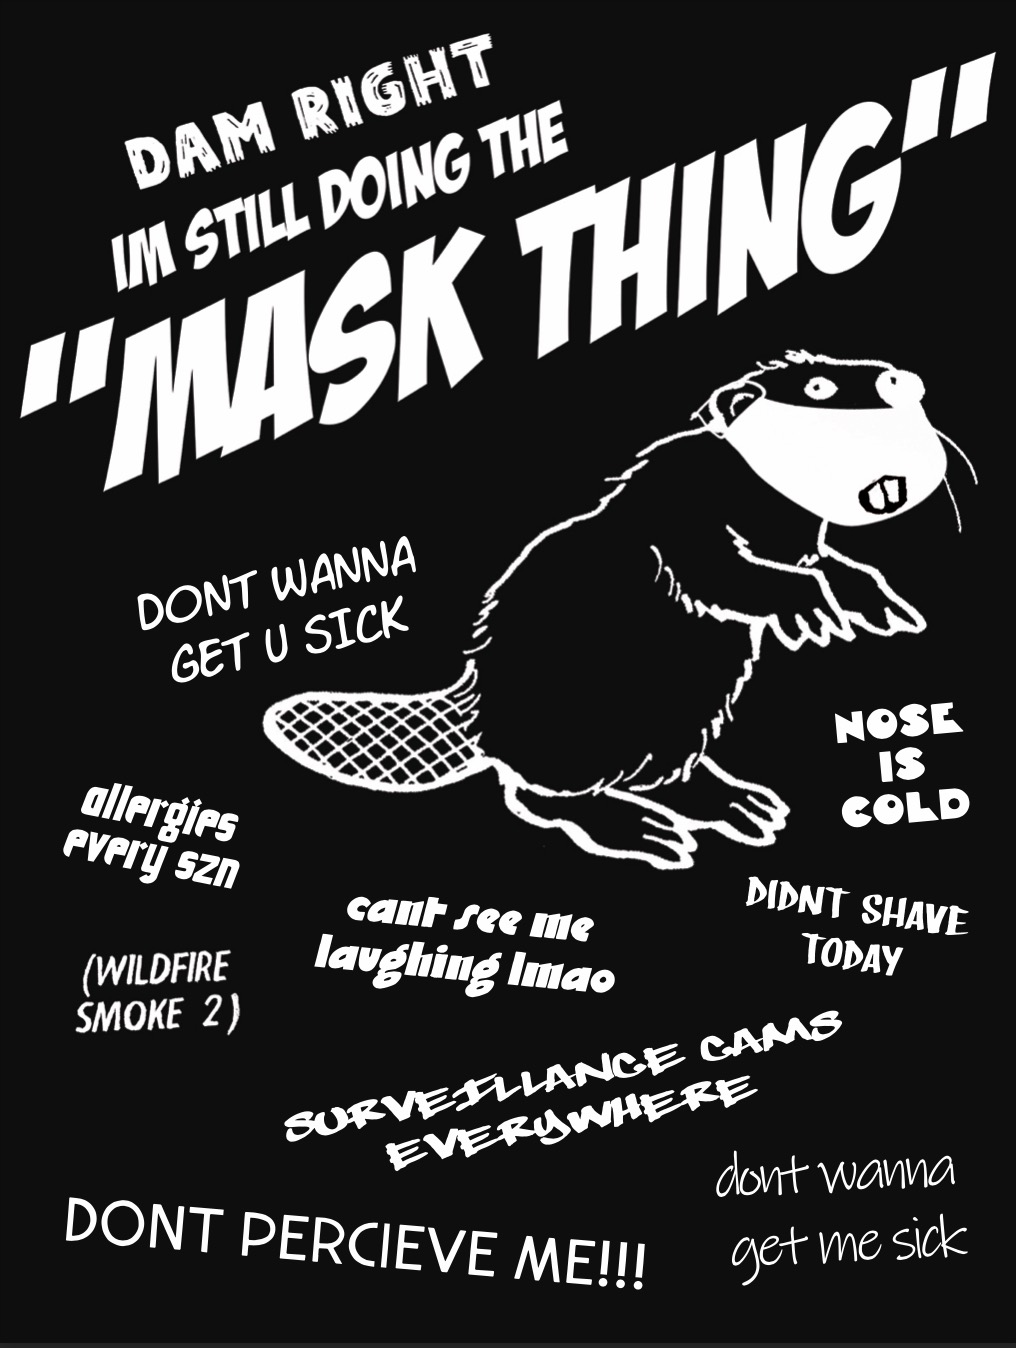 A black and white poster shows a beaver looking startled. The headline reads: Damn right im still doing the Mask Thing, underneath there are some other lines, among them: don’t wanna get u sick and: can’t see me laughing lmao